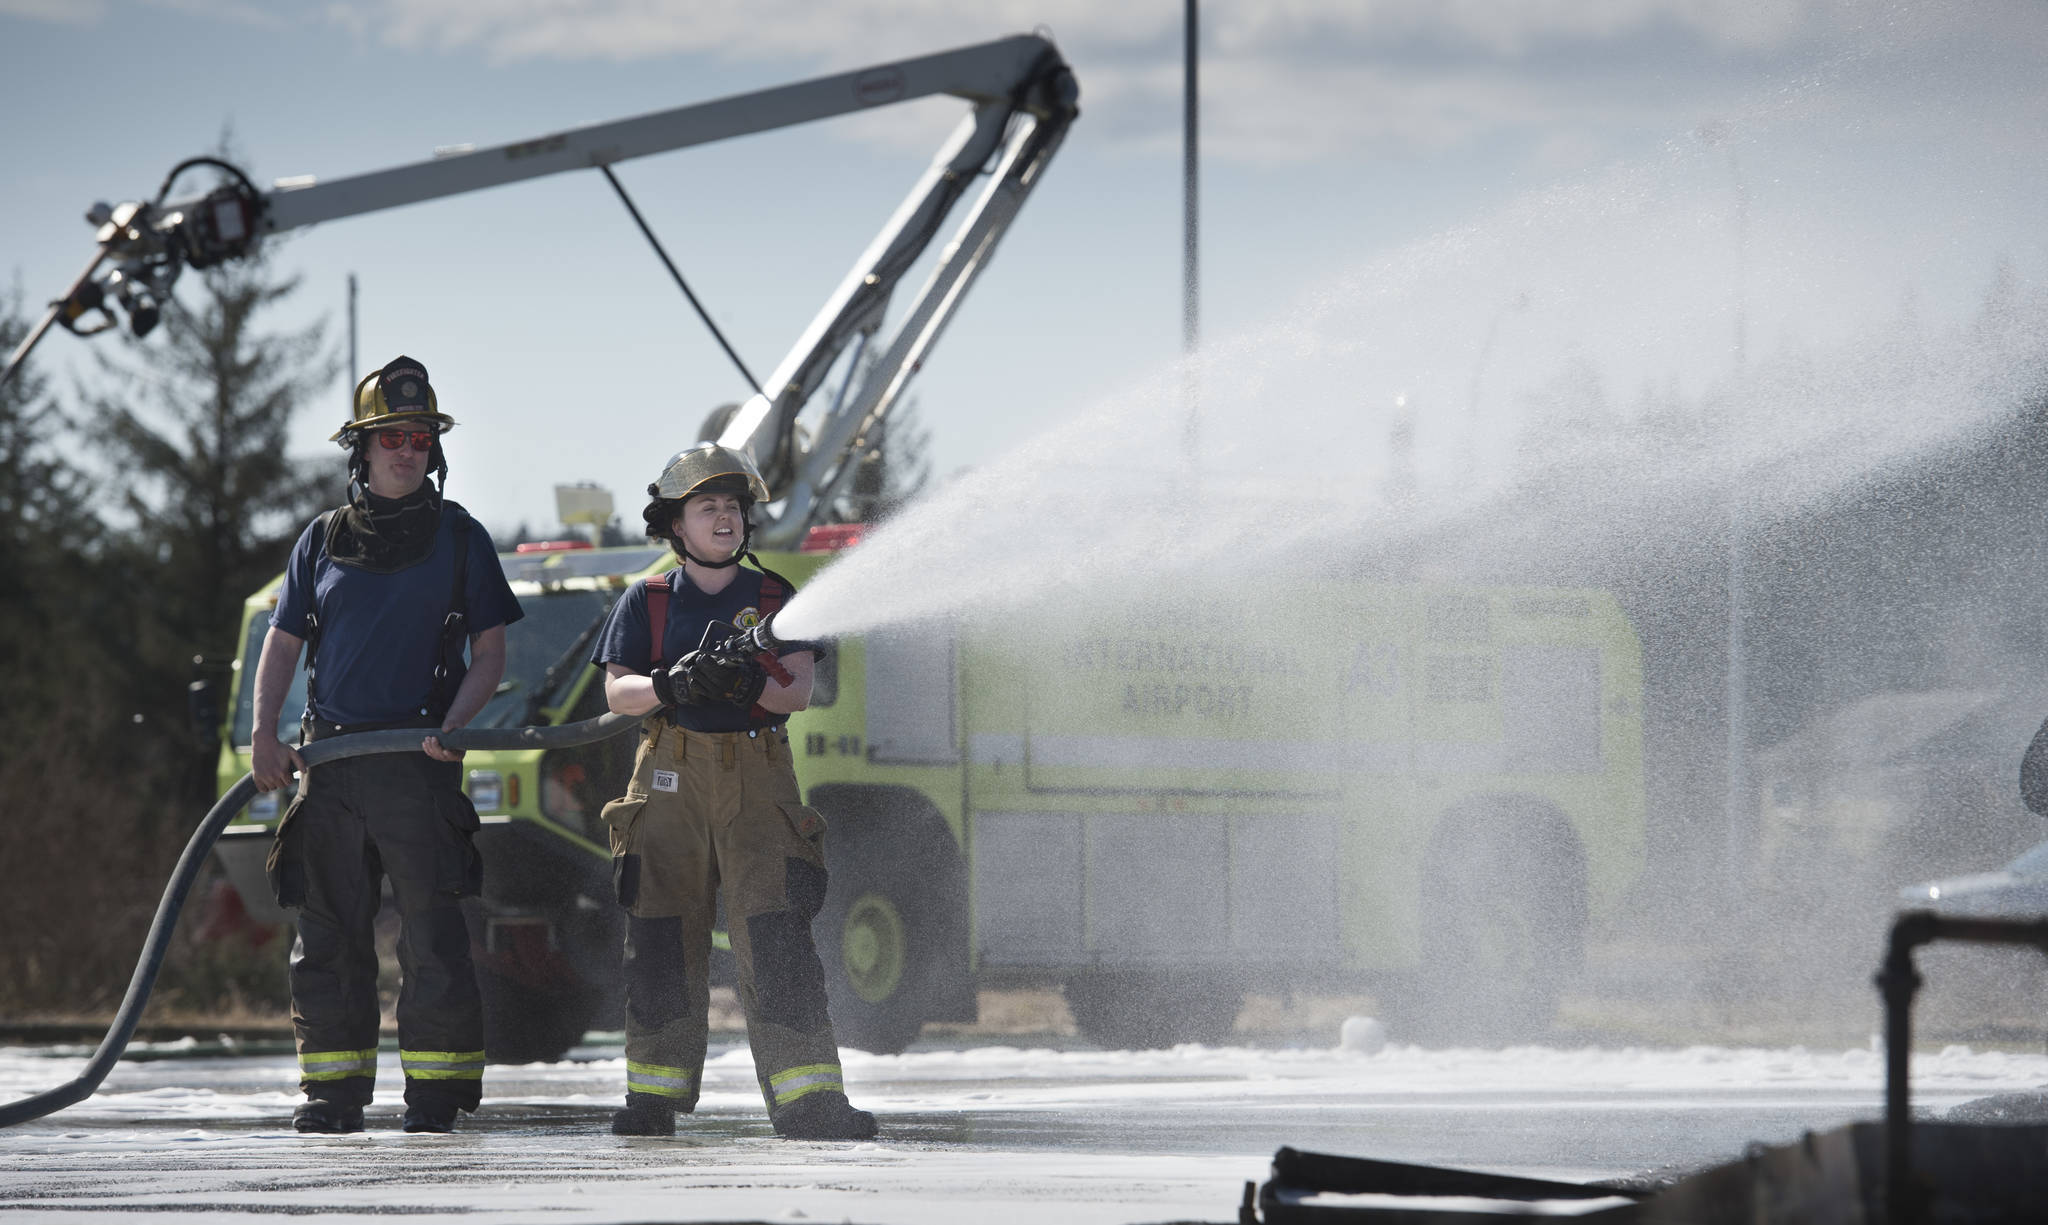 In this file photo from April 13, 2017, firefighters spray foam during a drill at the Hagevig Regional Fire Training Center. The state filed a lawsuit against several foam manufacturers for not disclosing contaminants in their products. (Michael Penn | Juneau Empire File)